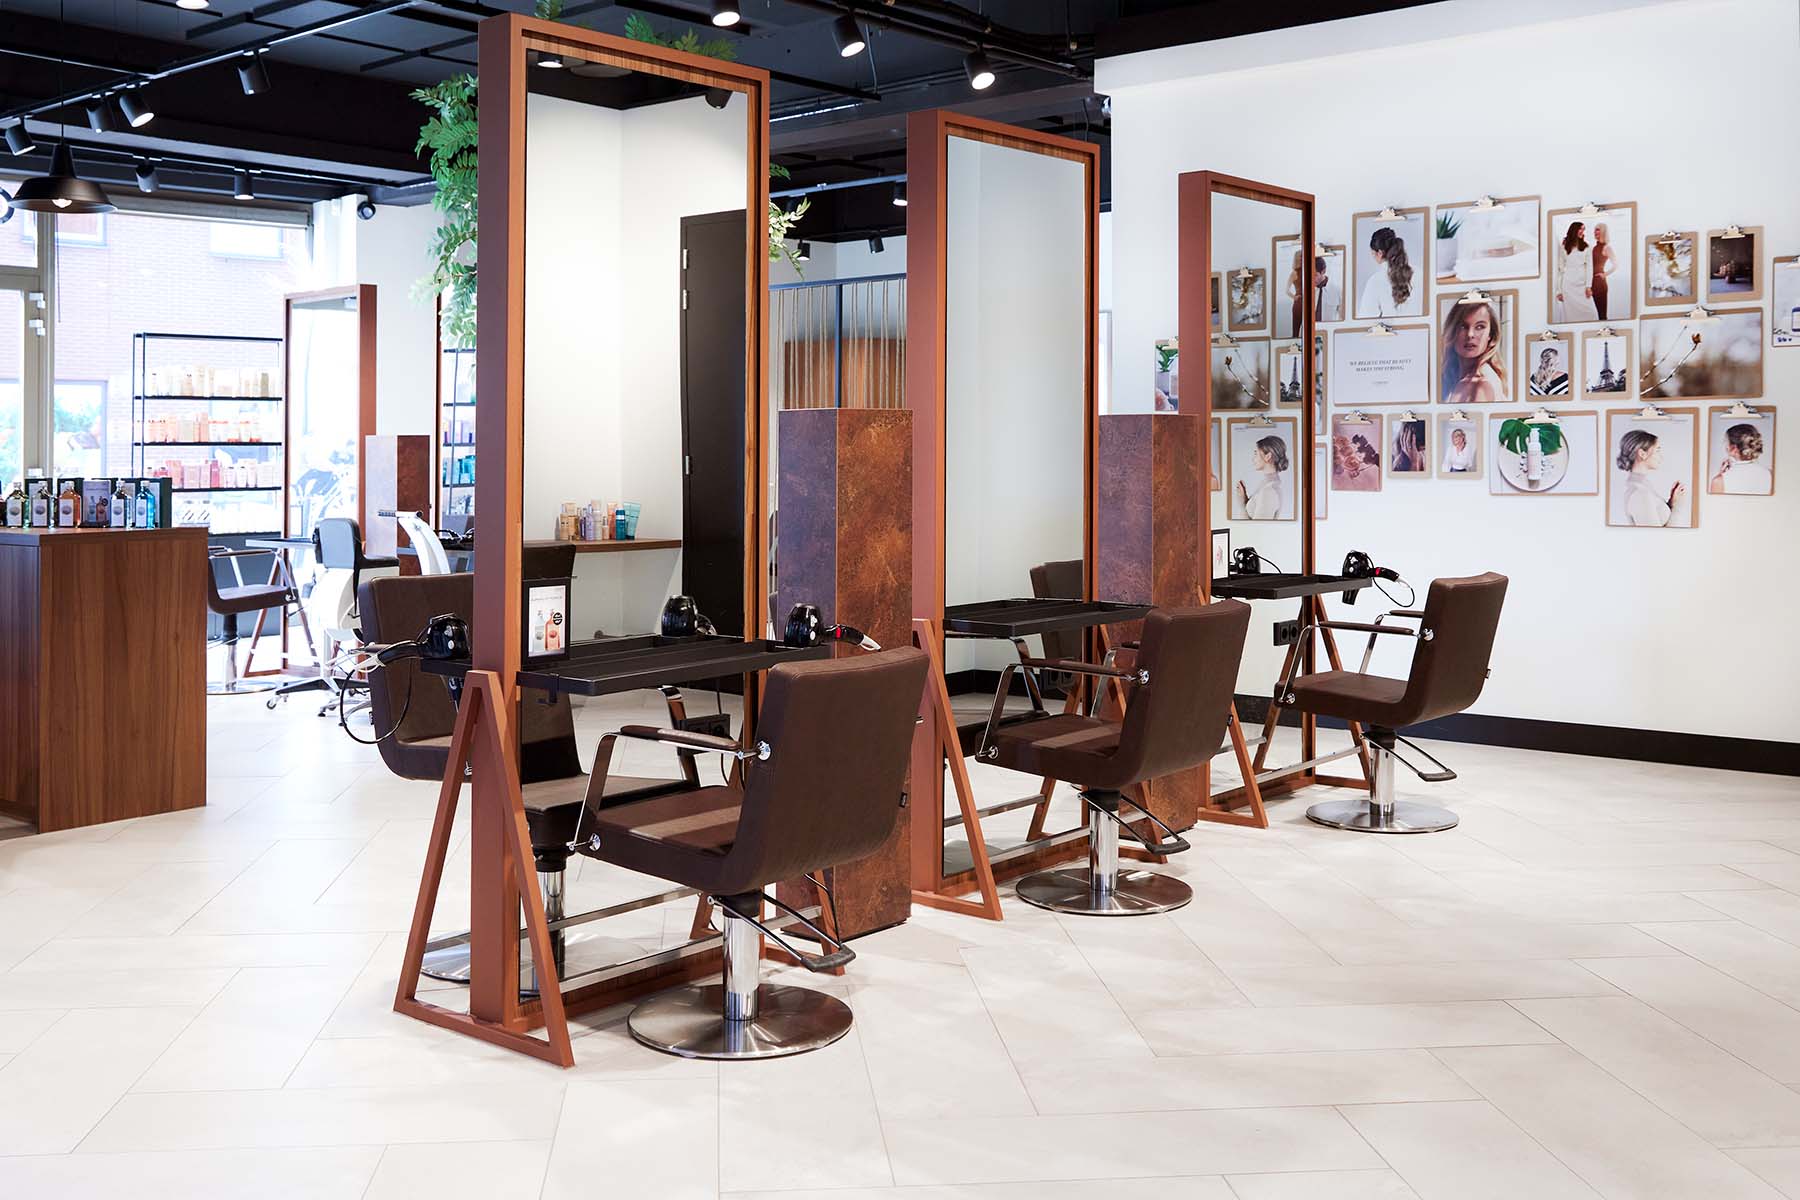 Cosmo Hairstyling salon